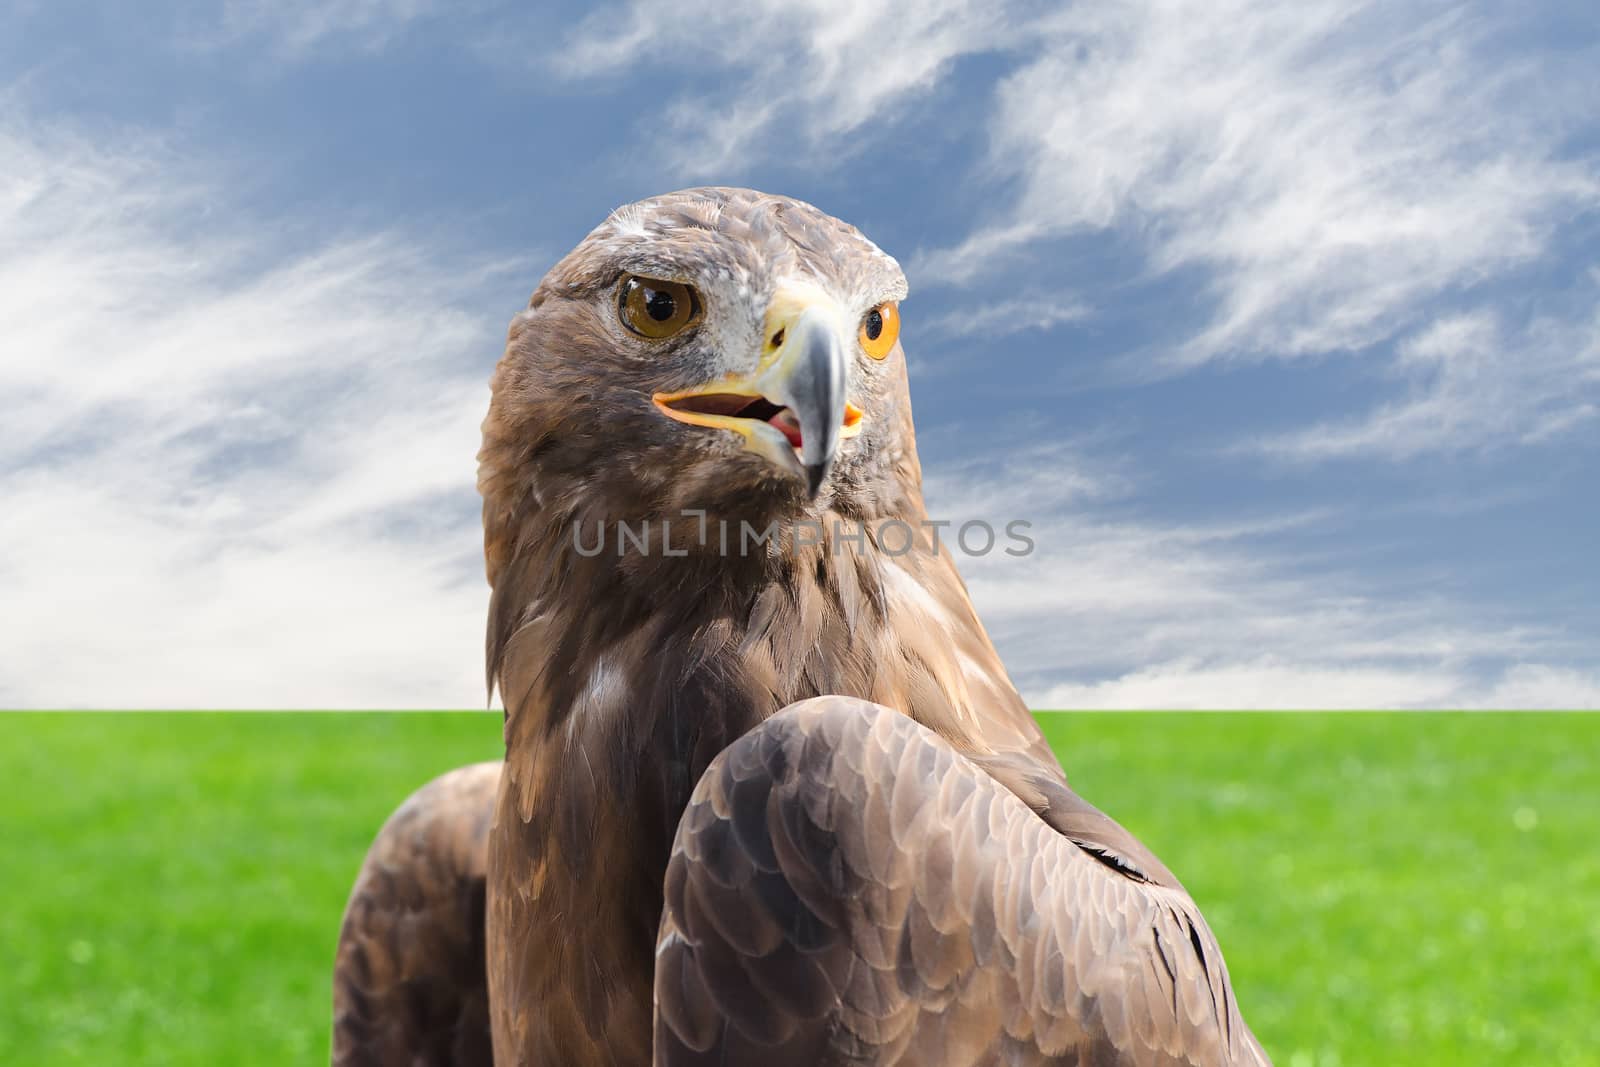 Golden eagle strong raptor bird against cloudy sky and grass by servickuz